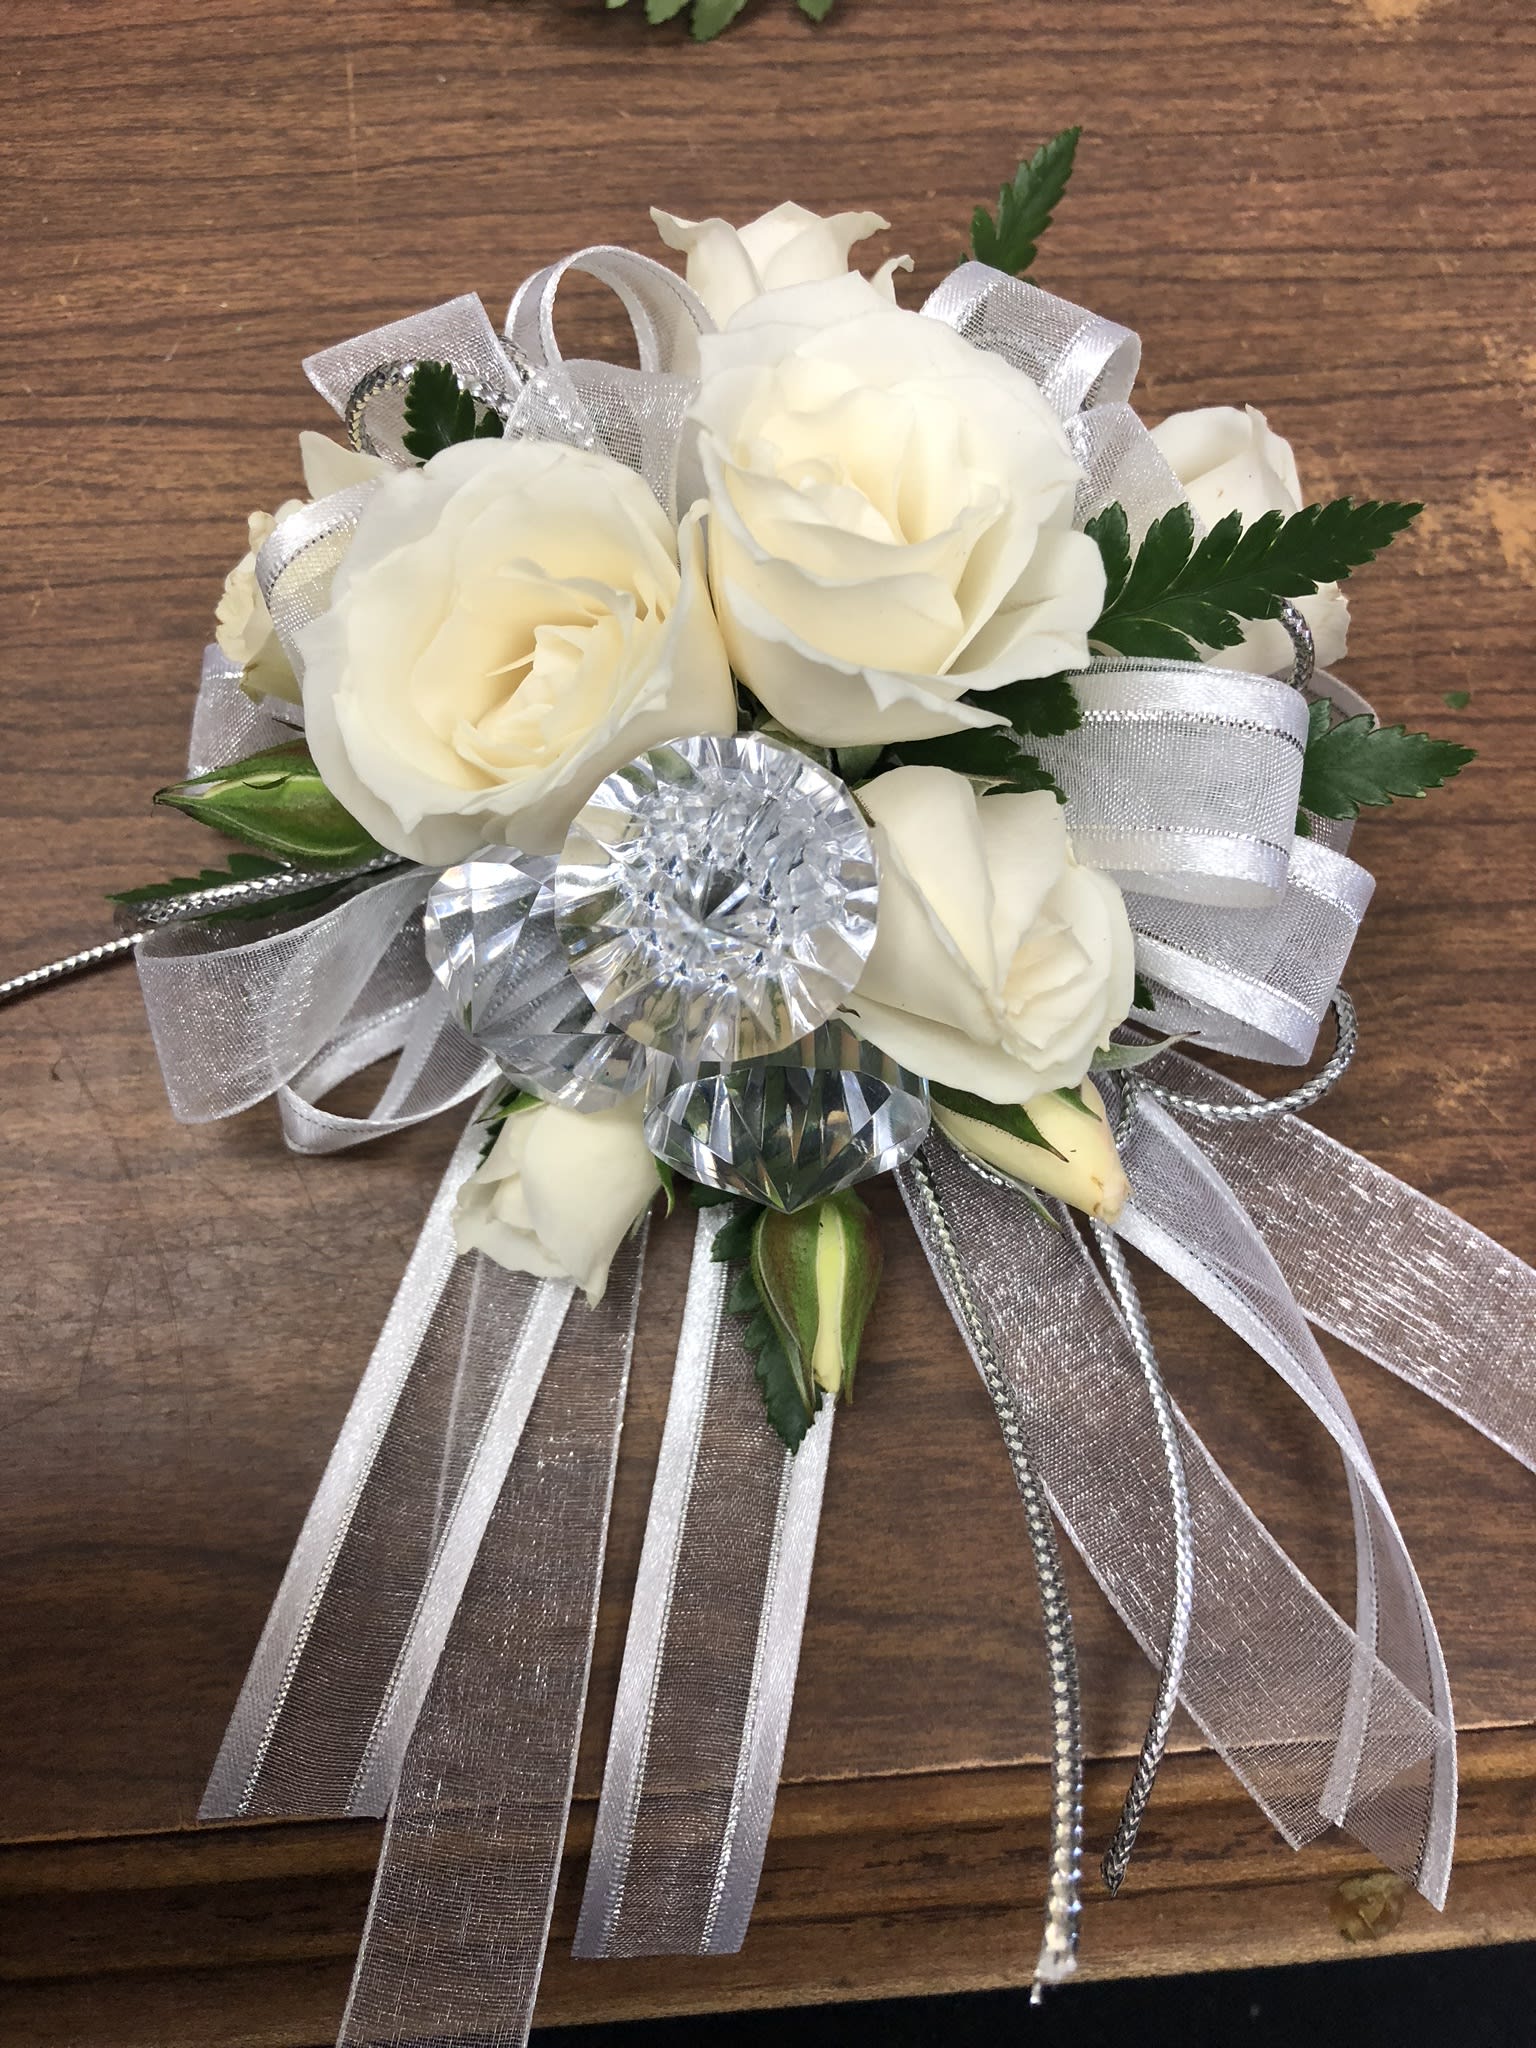 White Corsage - An all white corsage with rhinestone accents of the designers choice. Please include in the special instruction if you'd like to add an accent color rather than rhinestones DELUXE HAS RHINESTONE BRACELET